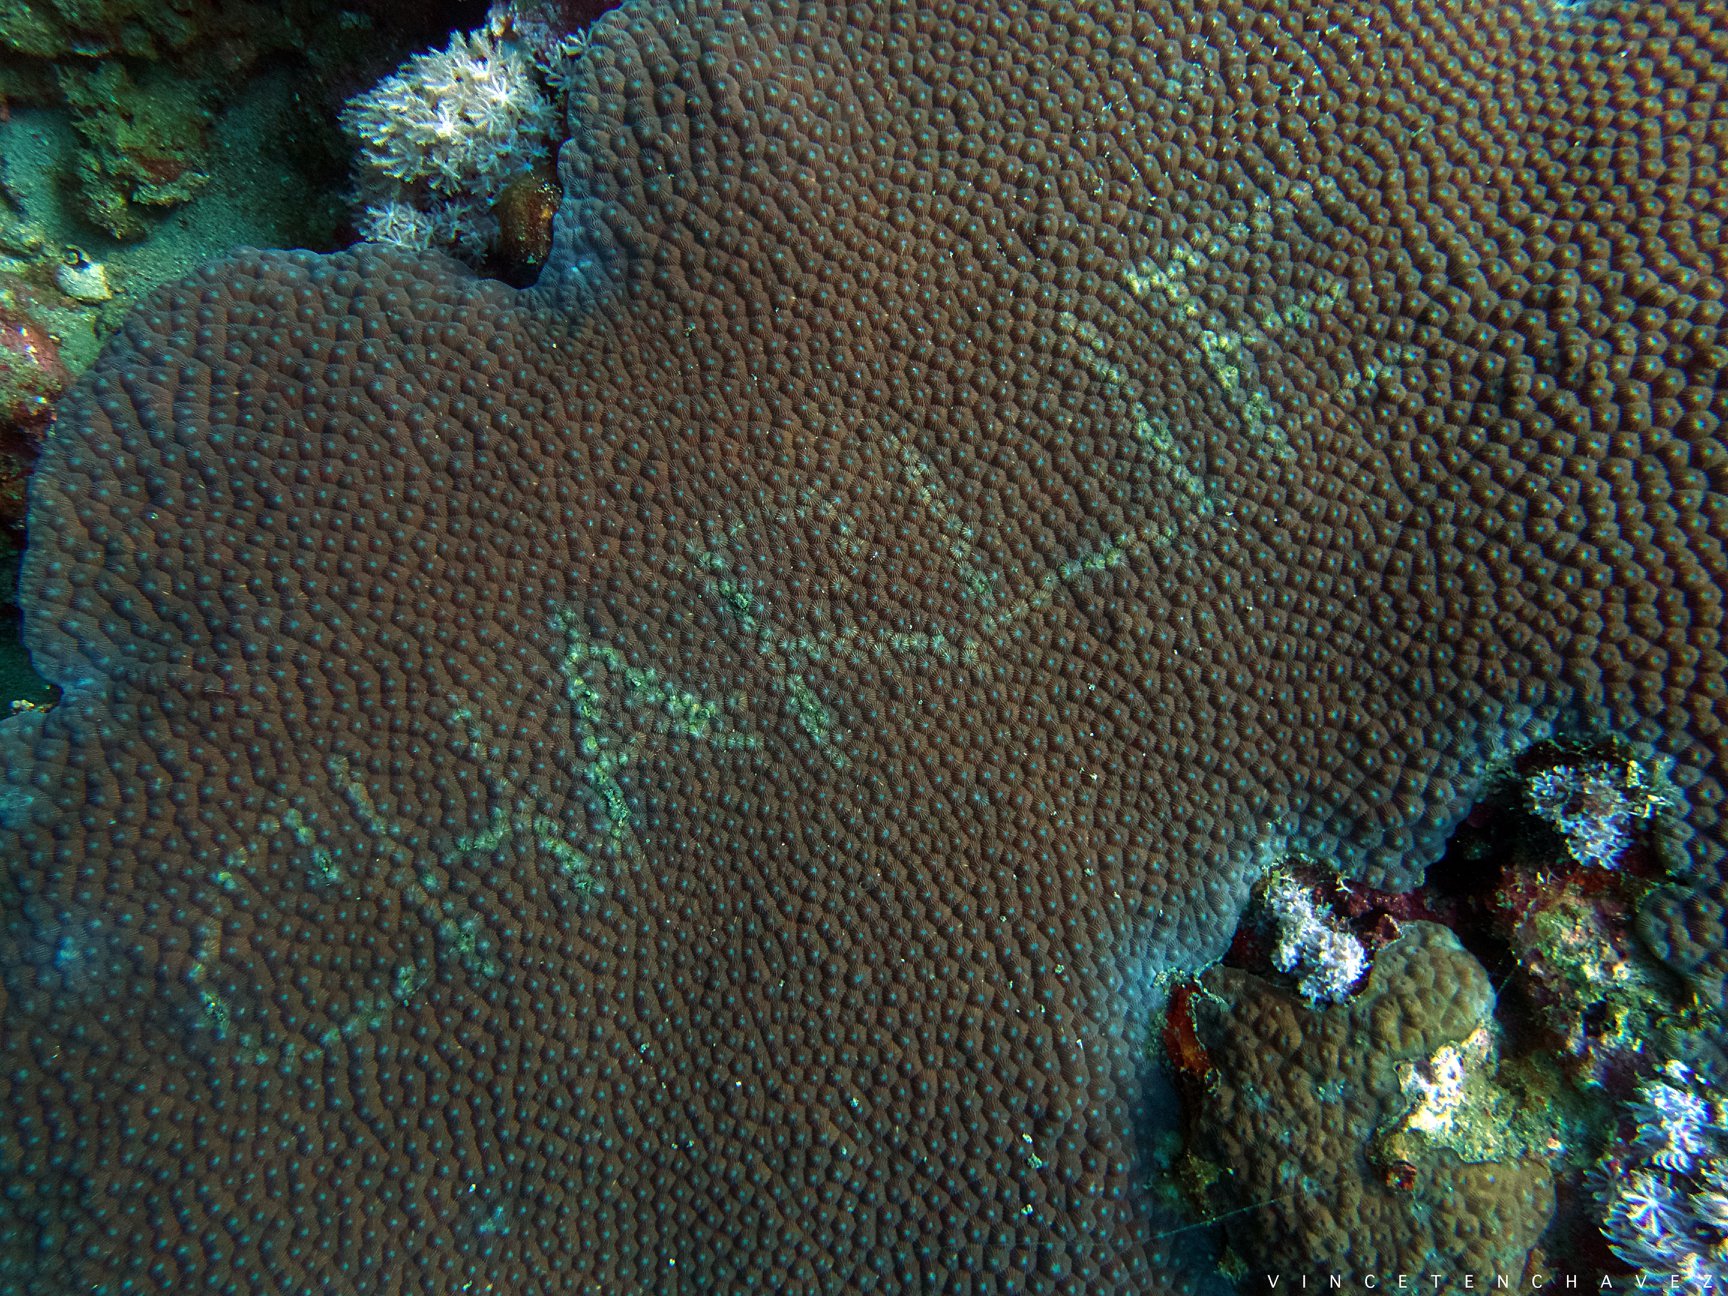 Dear People, Stop Carving Words Into Corals